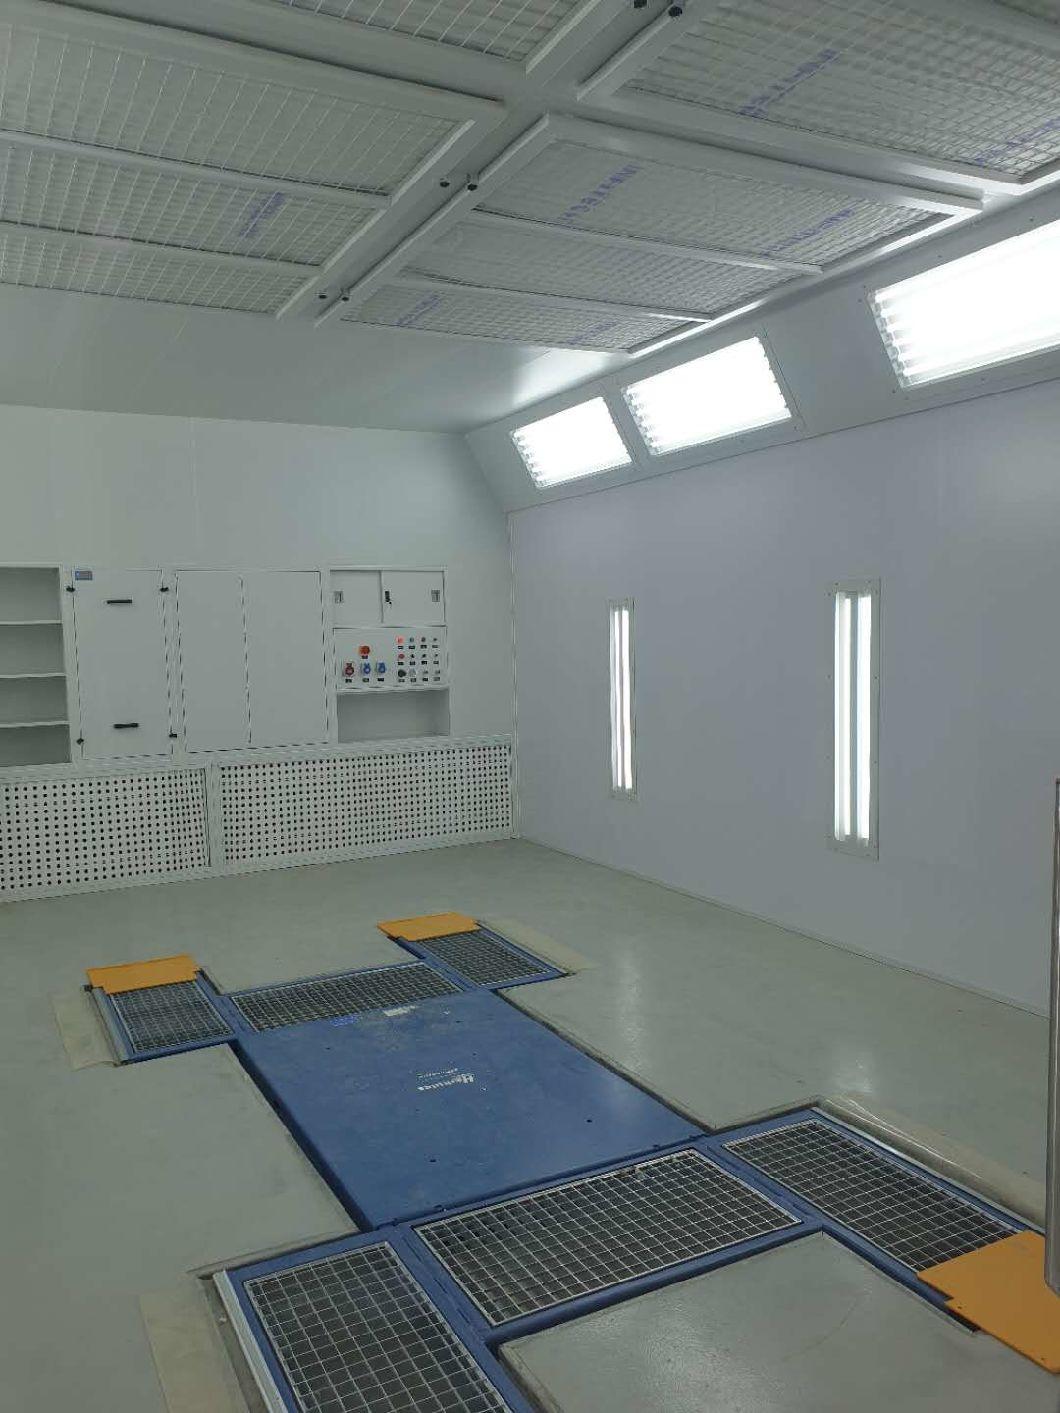 Auto Paint Car Baking Booth Spray Room Brand Spray Booth Microcomputer Control Automotive Paint Booths